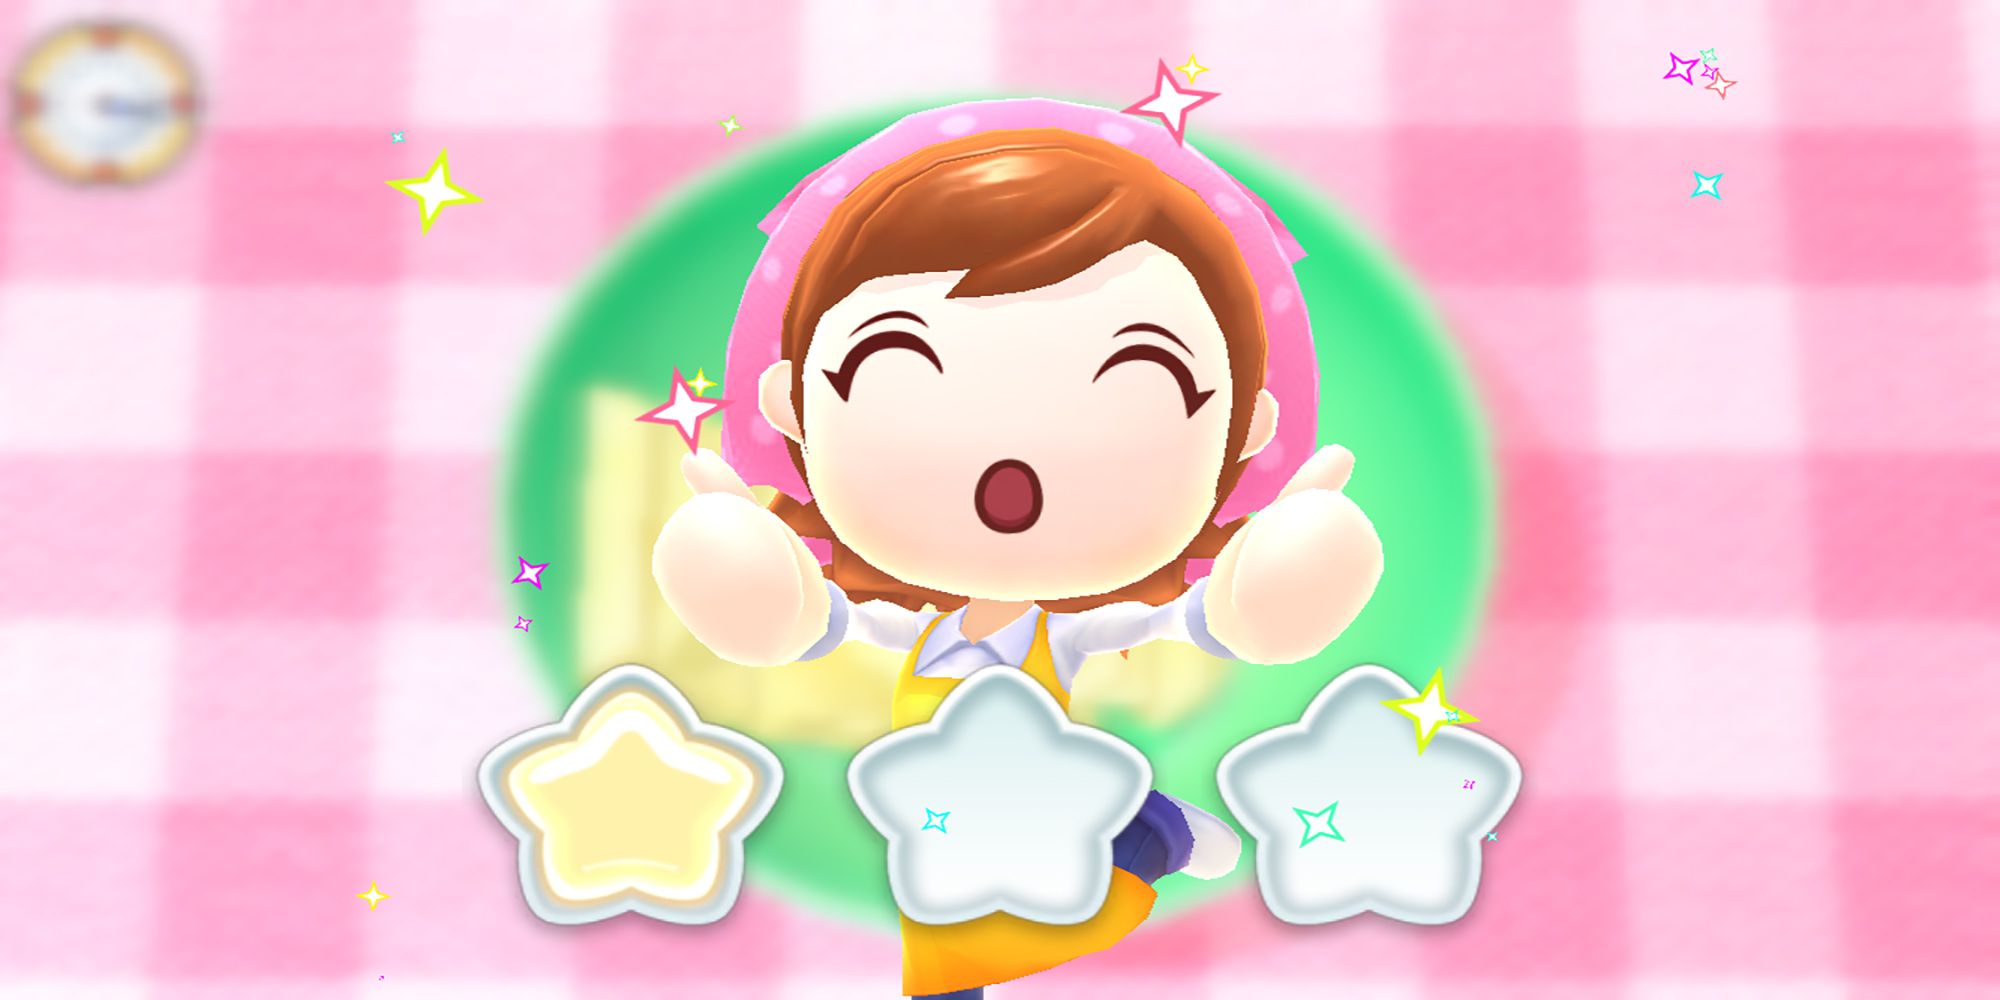 Cooking Mama blows you a kiss for your expertly cut potatoes in Cooking Mama: Cuisine!